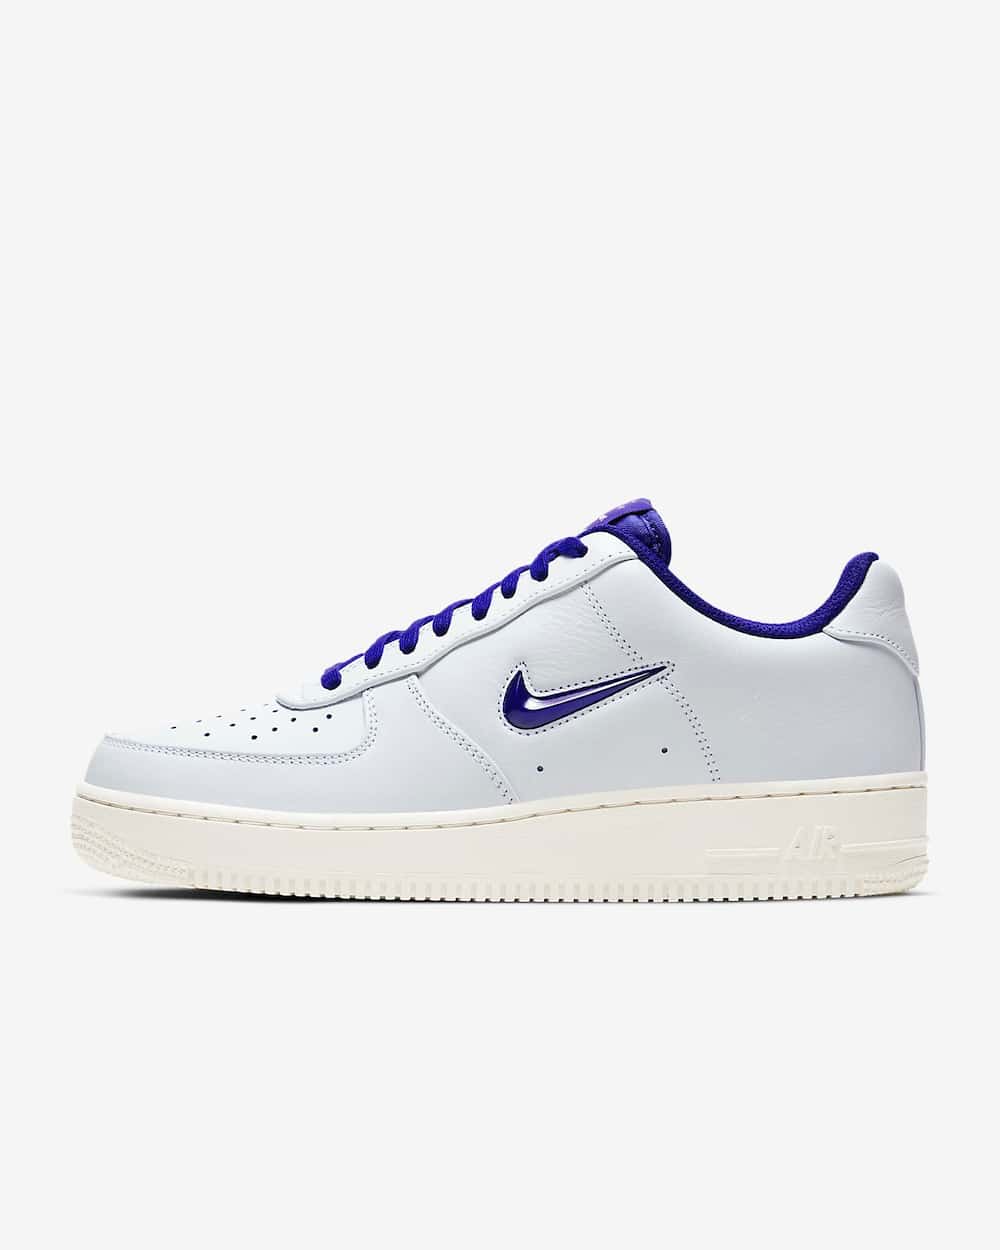 Step Up your Air Force 1 Game with These Kicks